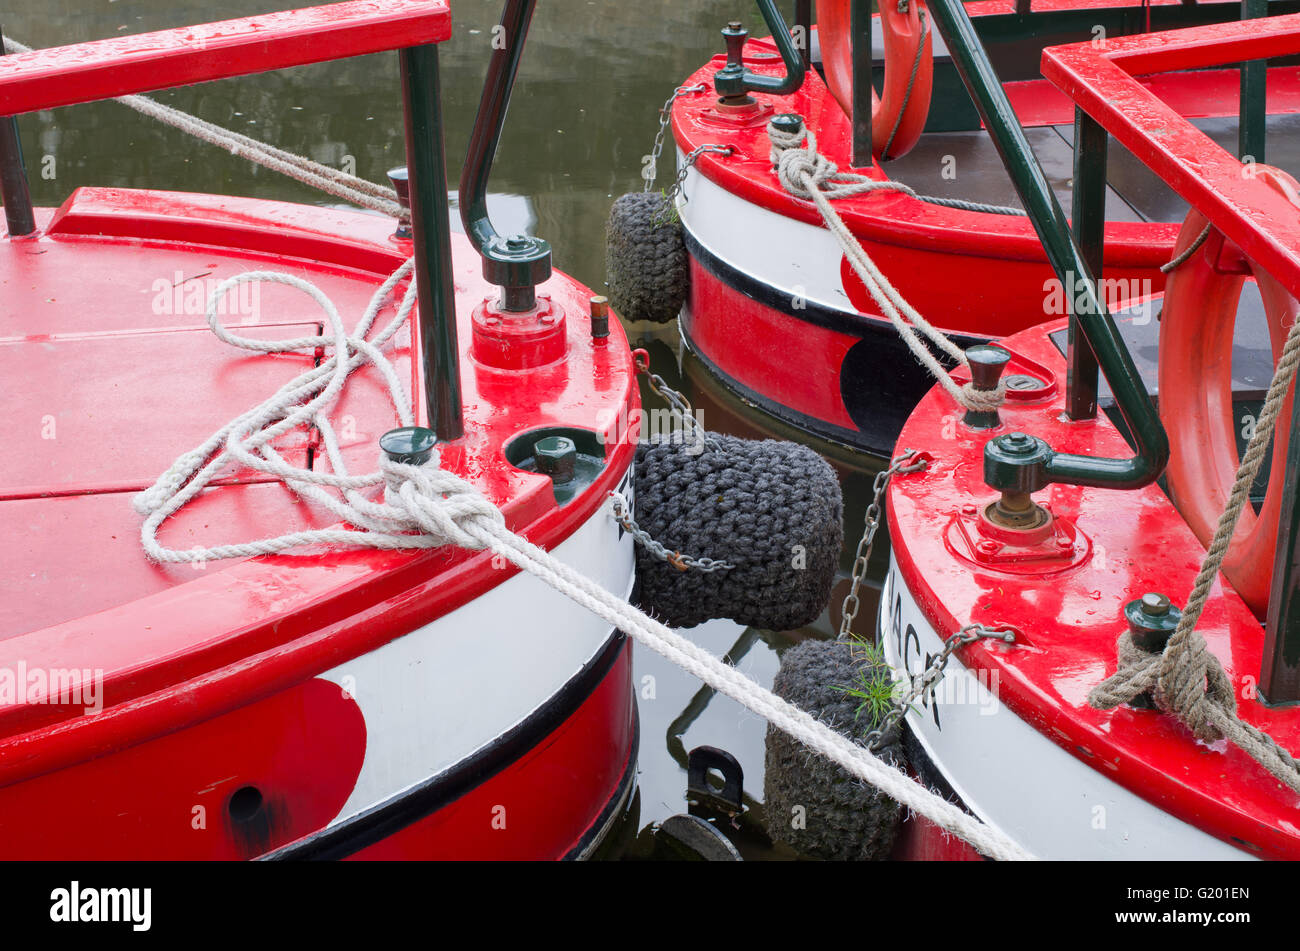 Sterns of canals boats Stock Photo